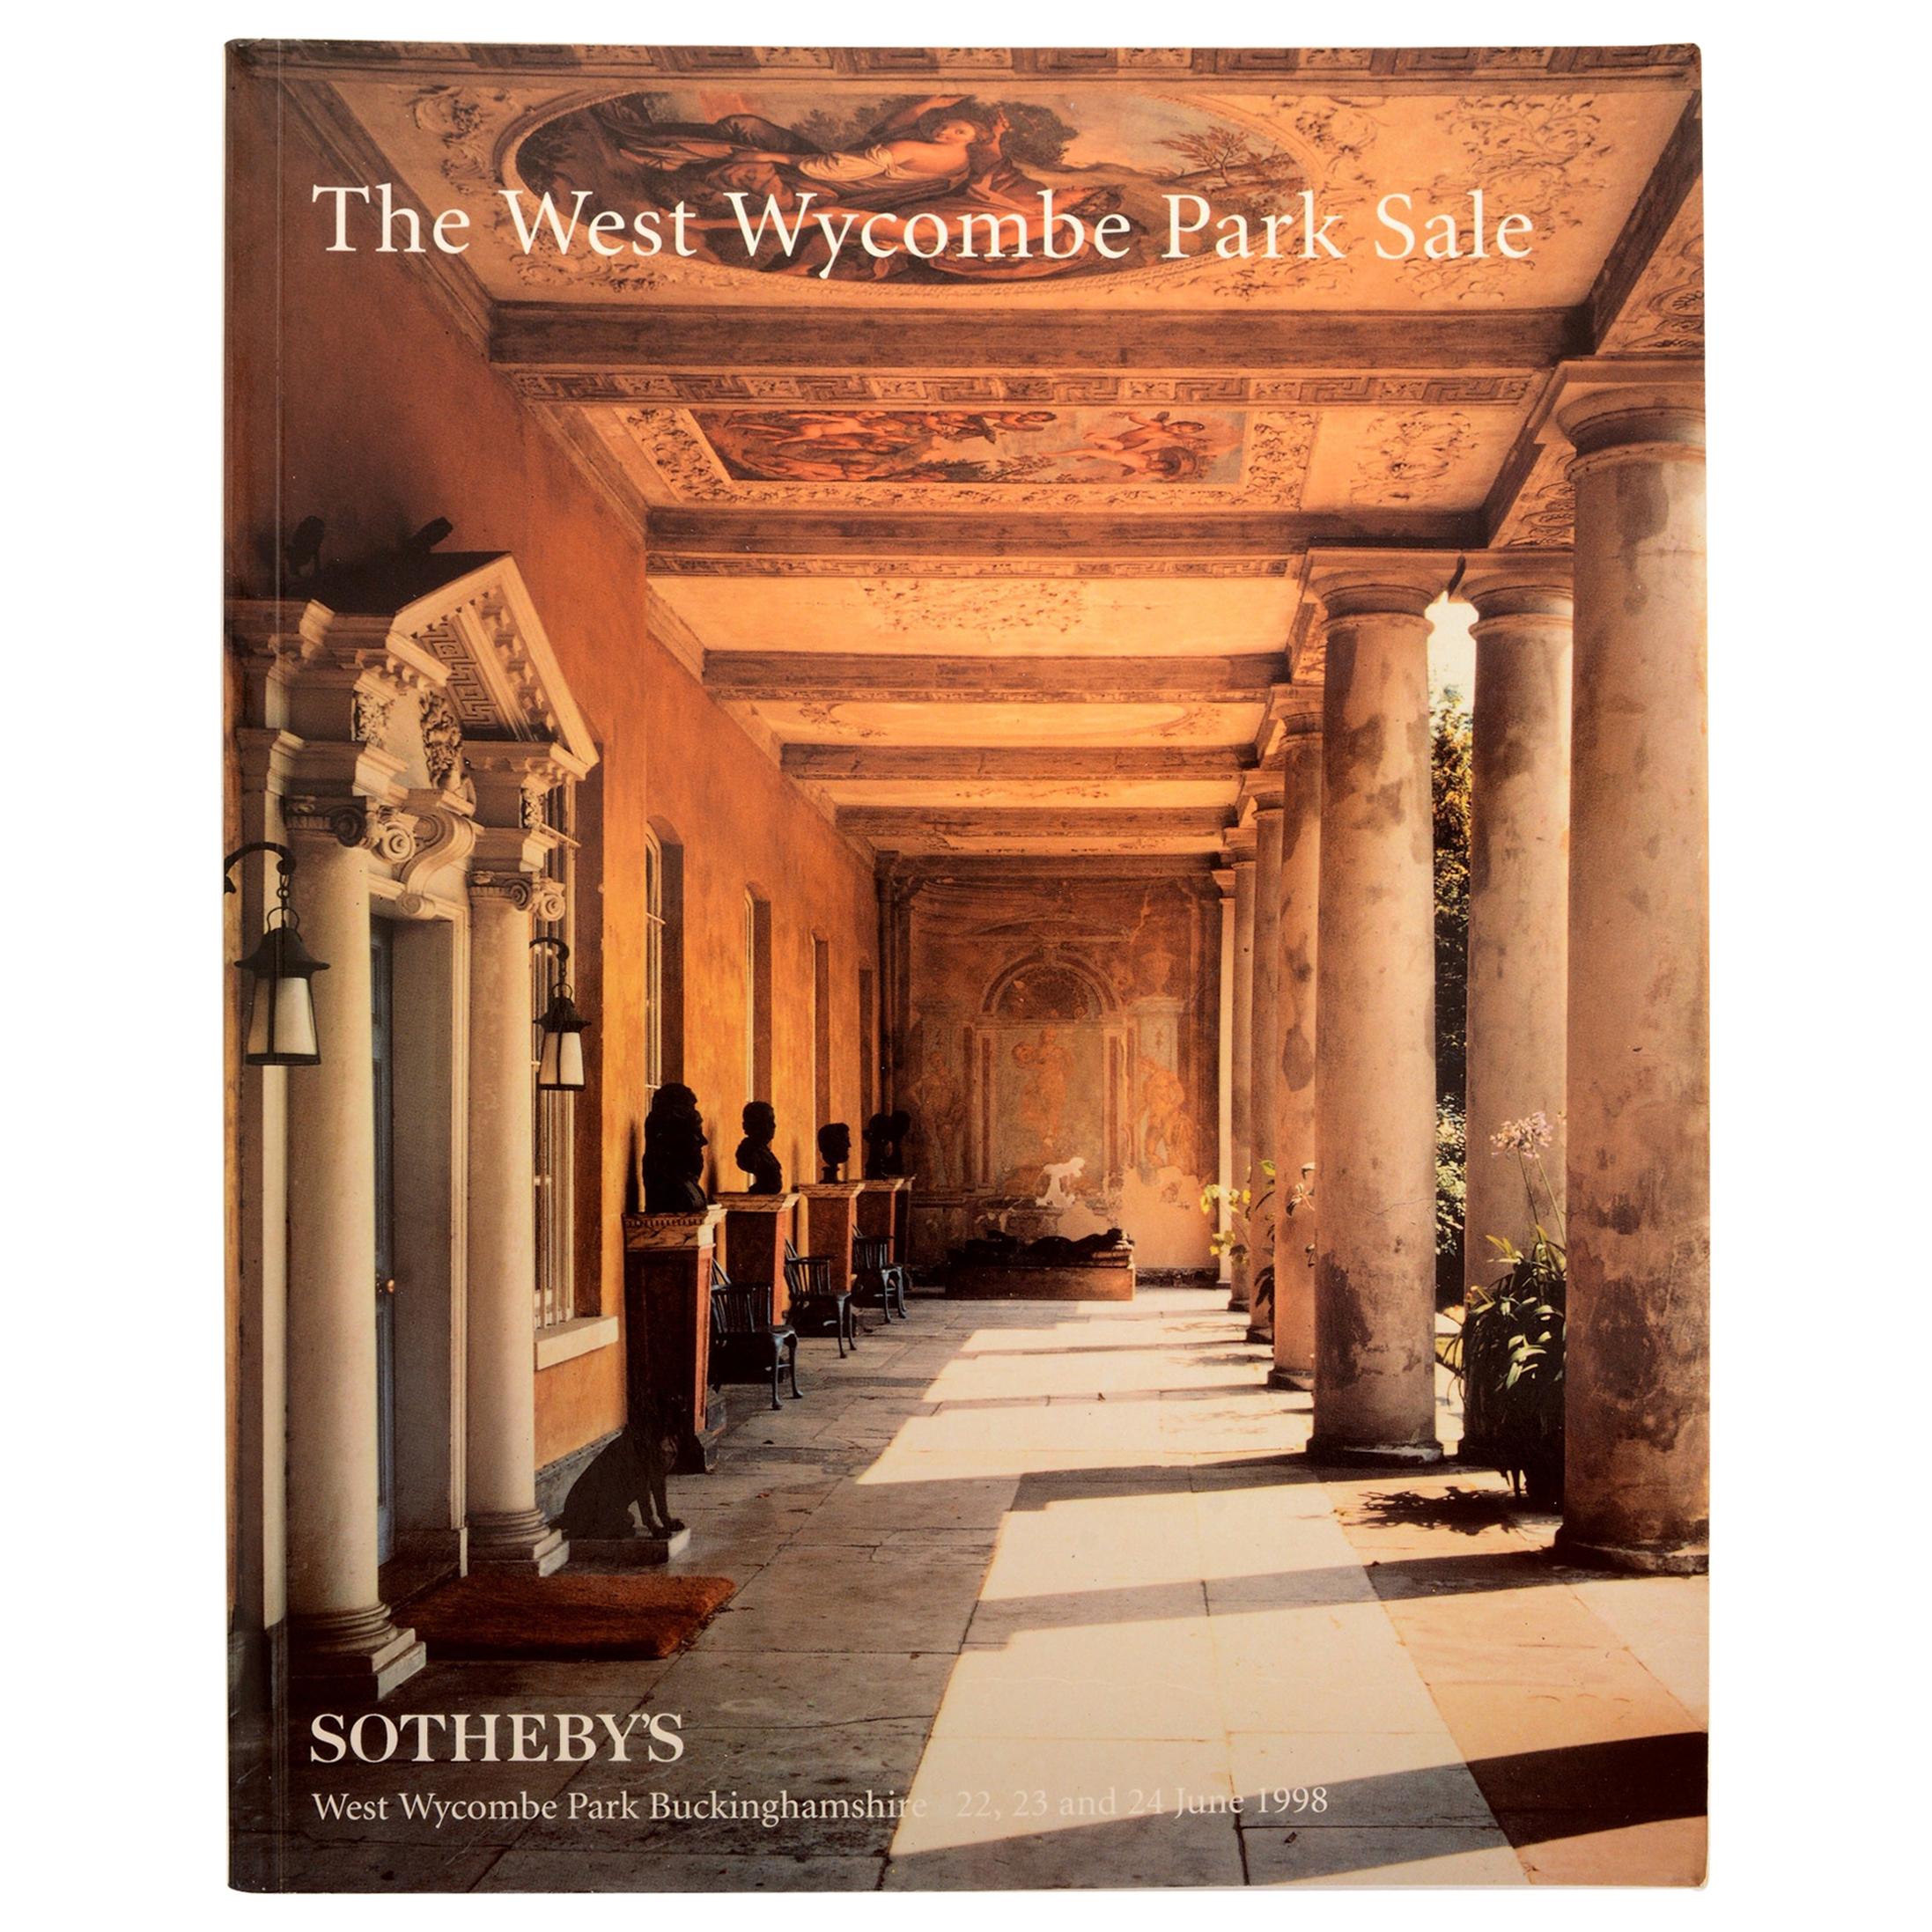 Sotheby's The West Wycombe Park Sale, June 1998, First Edition